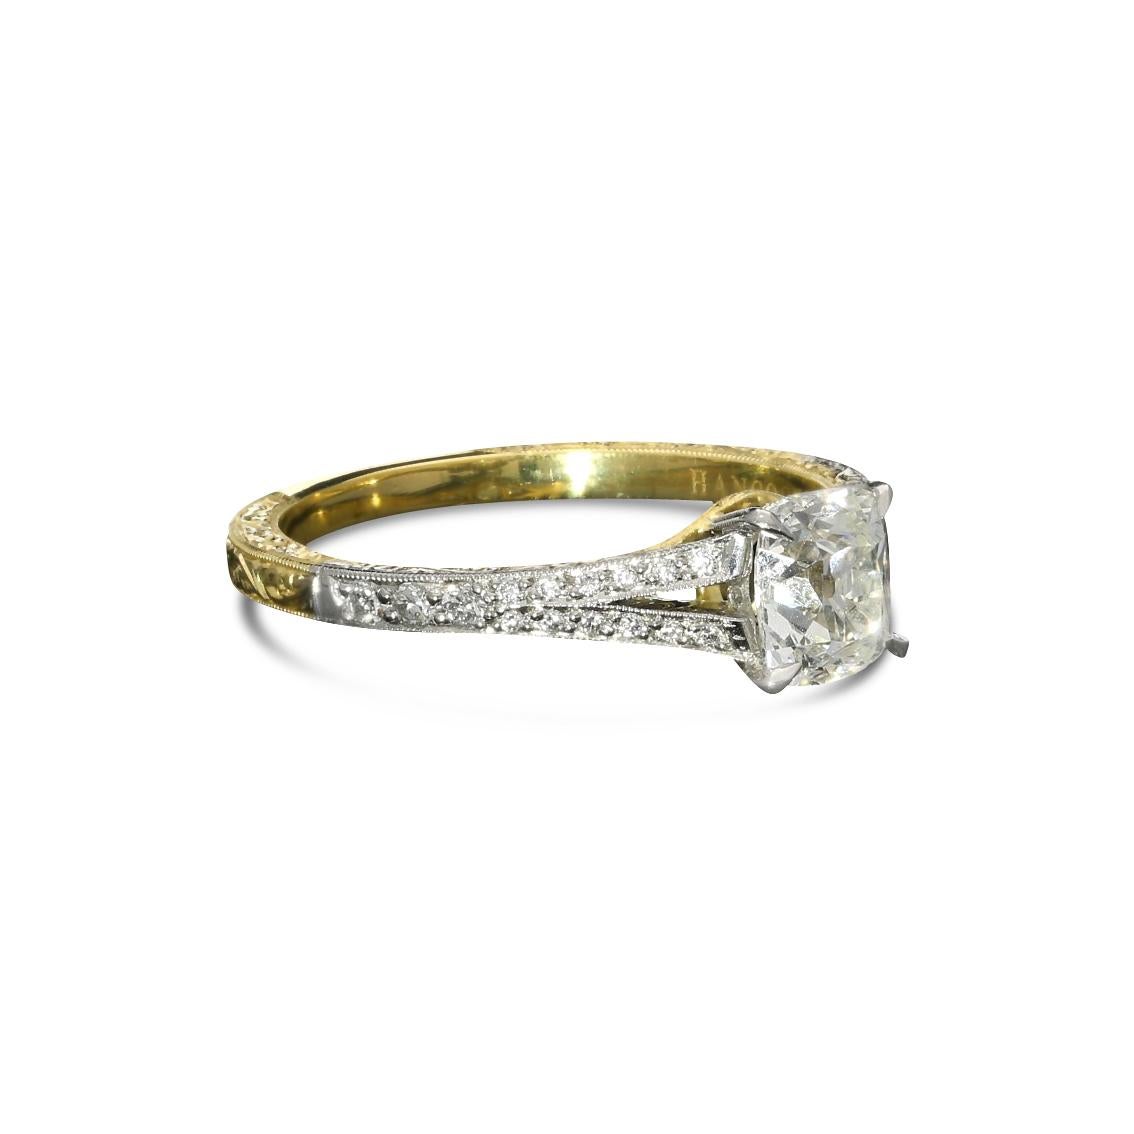 0.95 carat K VS1 old mine cushion cut diamond with GIA certificate
0.25 carat of round brilliant cut diamonds.
18 carat yellow gold and platinum with maker's mark, signature and London assay marks
UK finger size M, US size 6.5, can be adjusted to